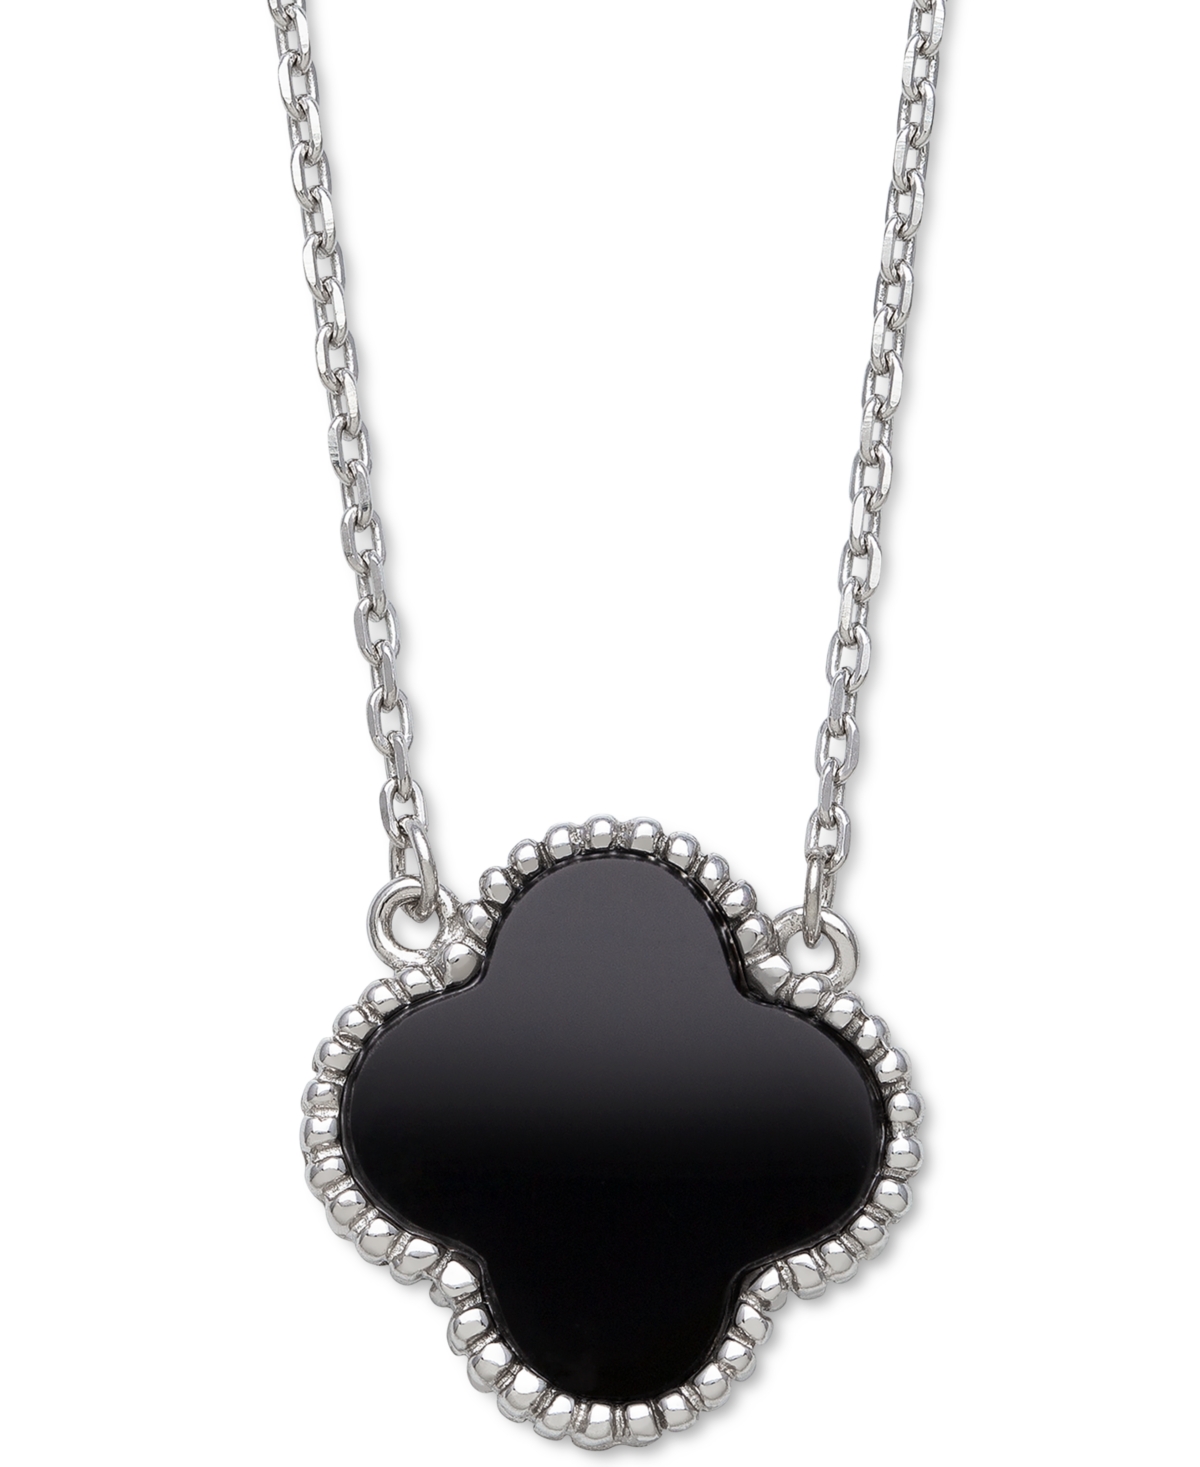 Belle de Mer Mother-of-Pearl Clover Pendant Necklace in Sterling Silver, 16" + 2" extender (Also in Onyx), Created for Macy's